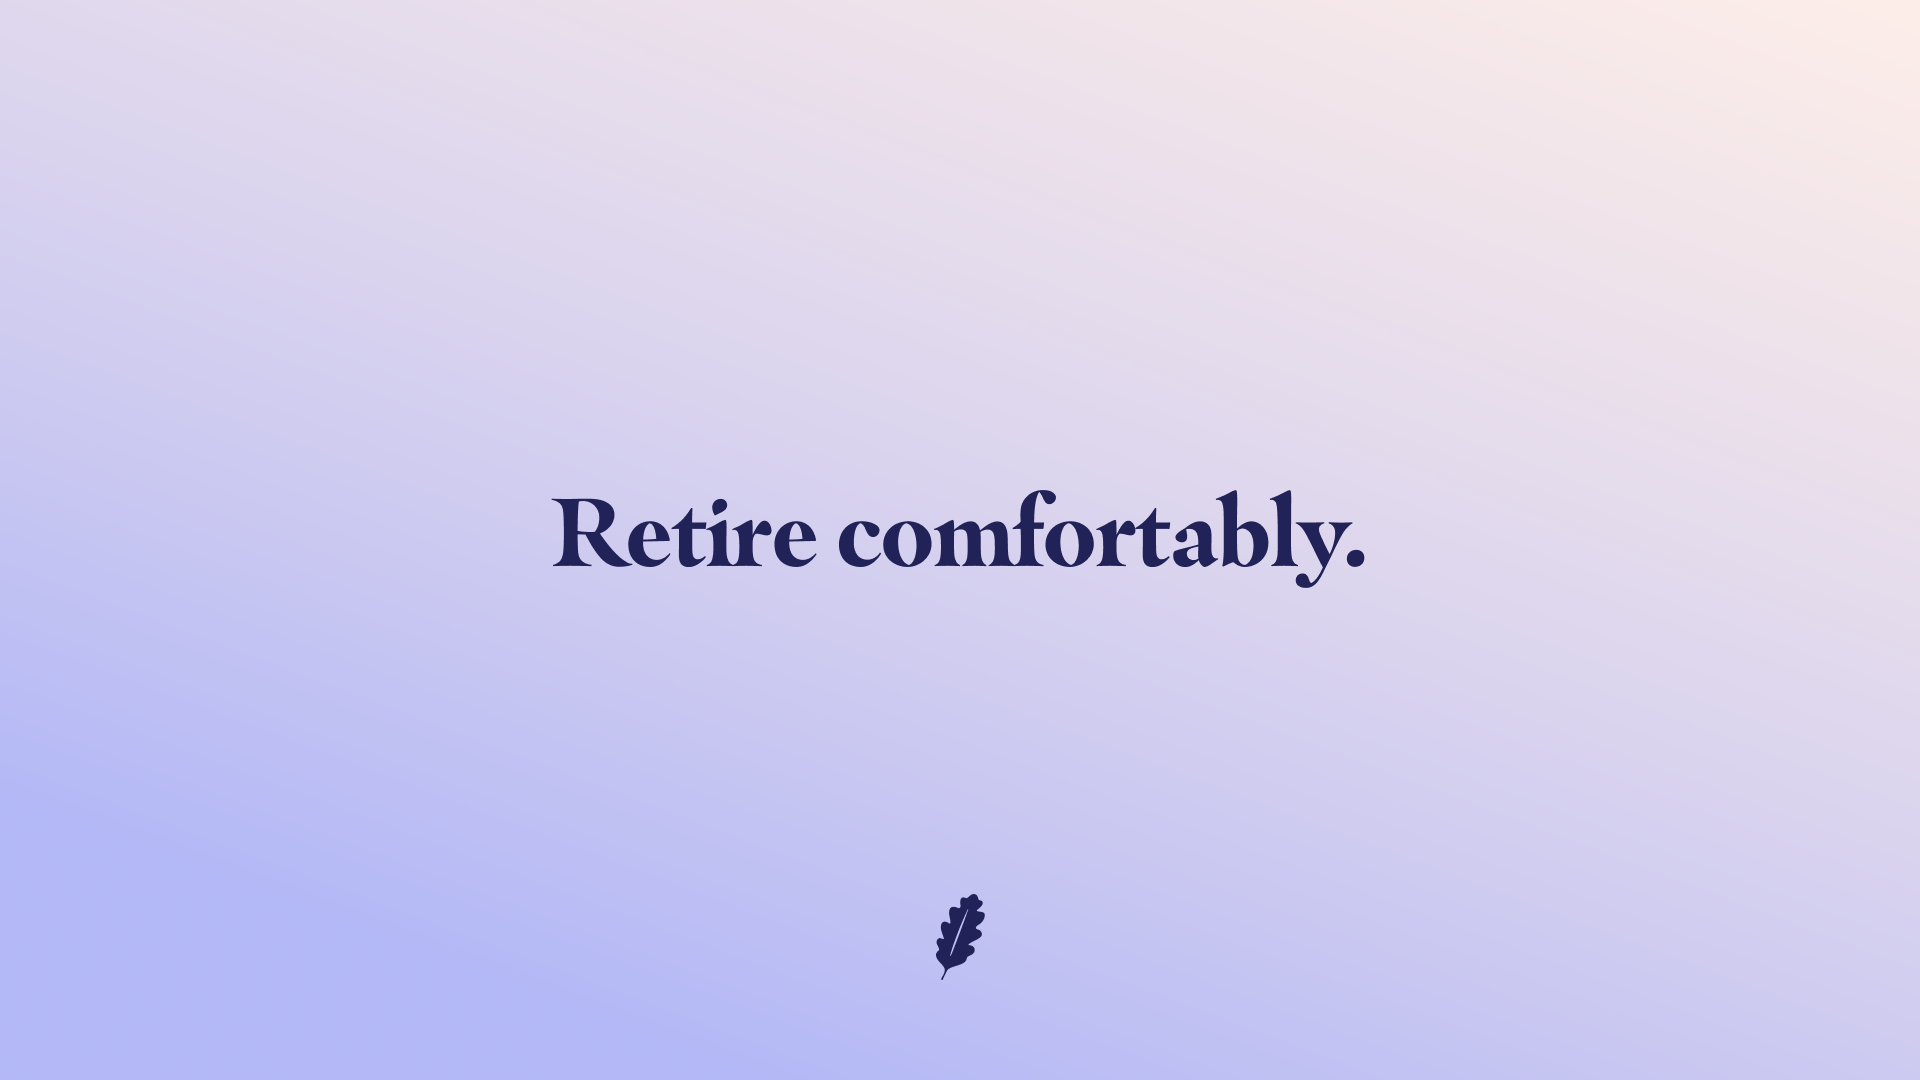 Messaging device saying “Retire comfortably.”